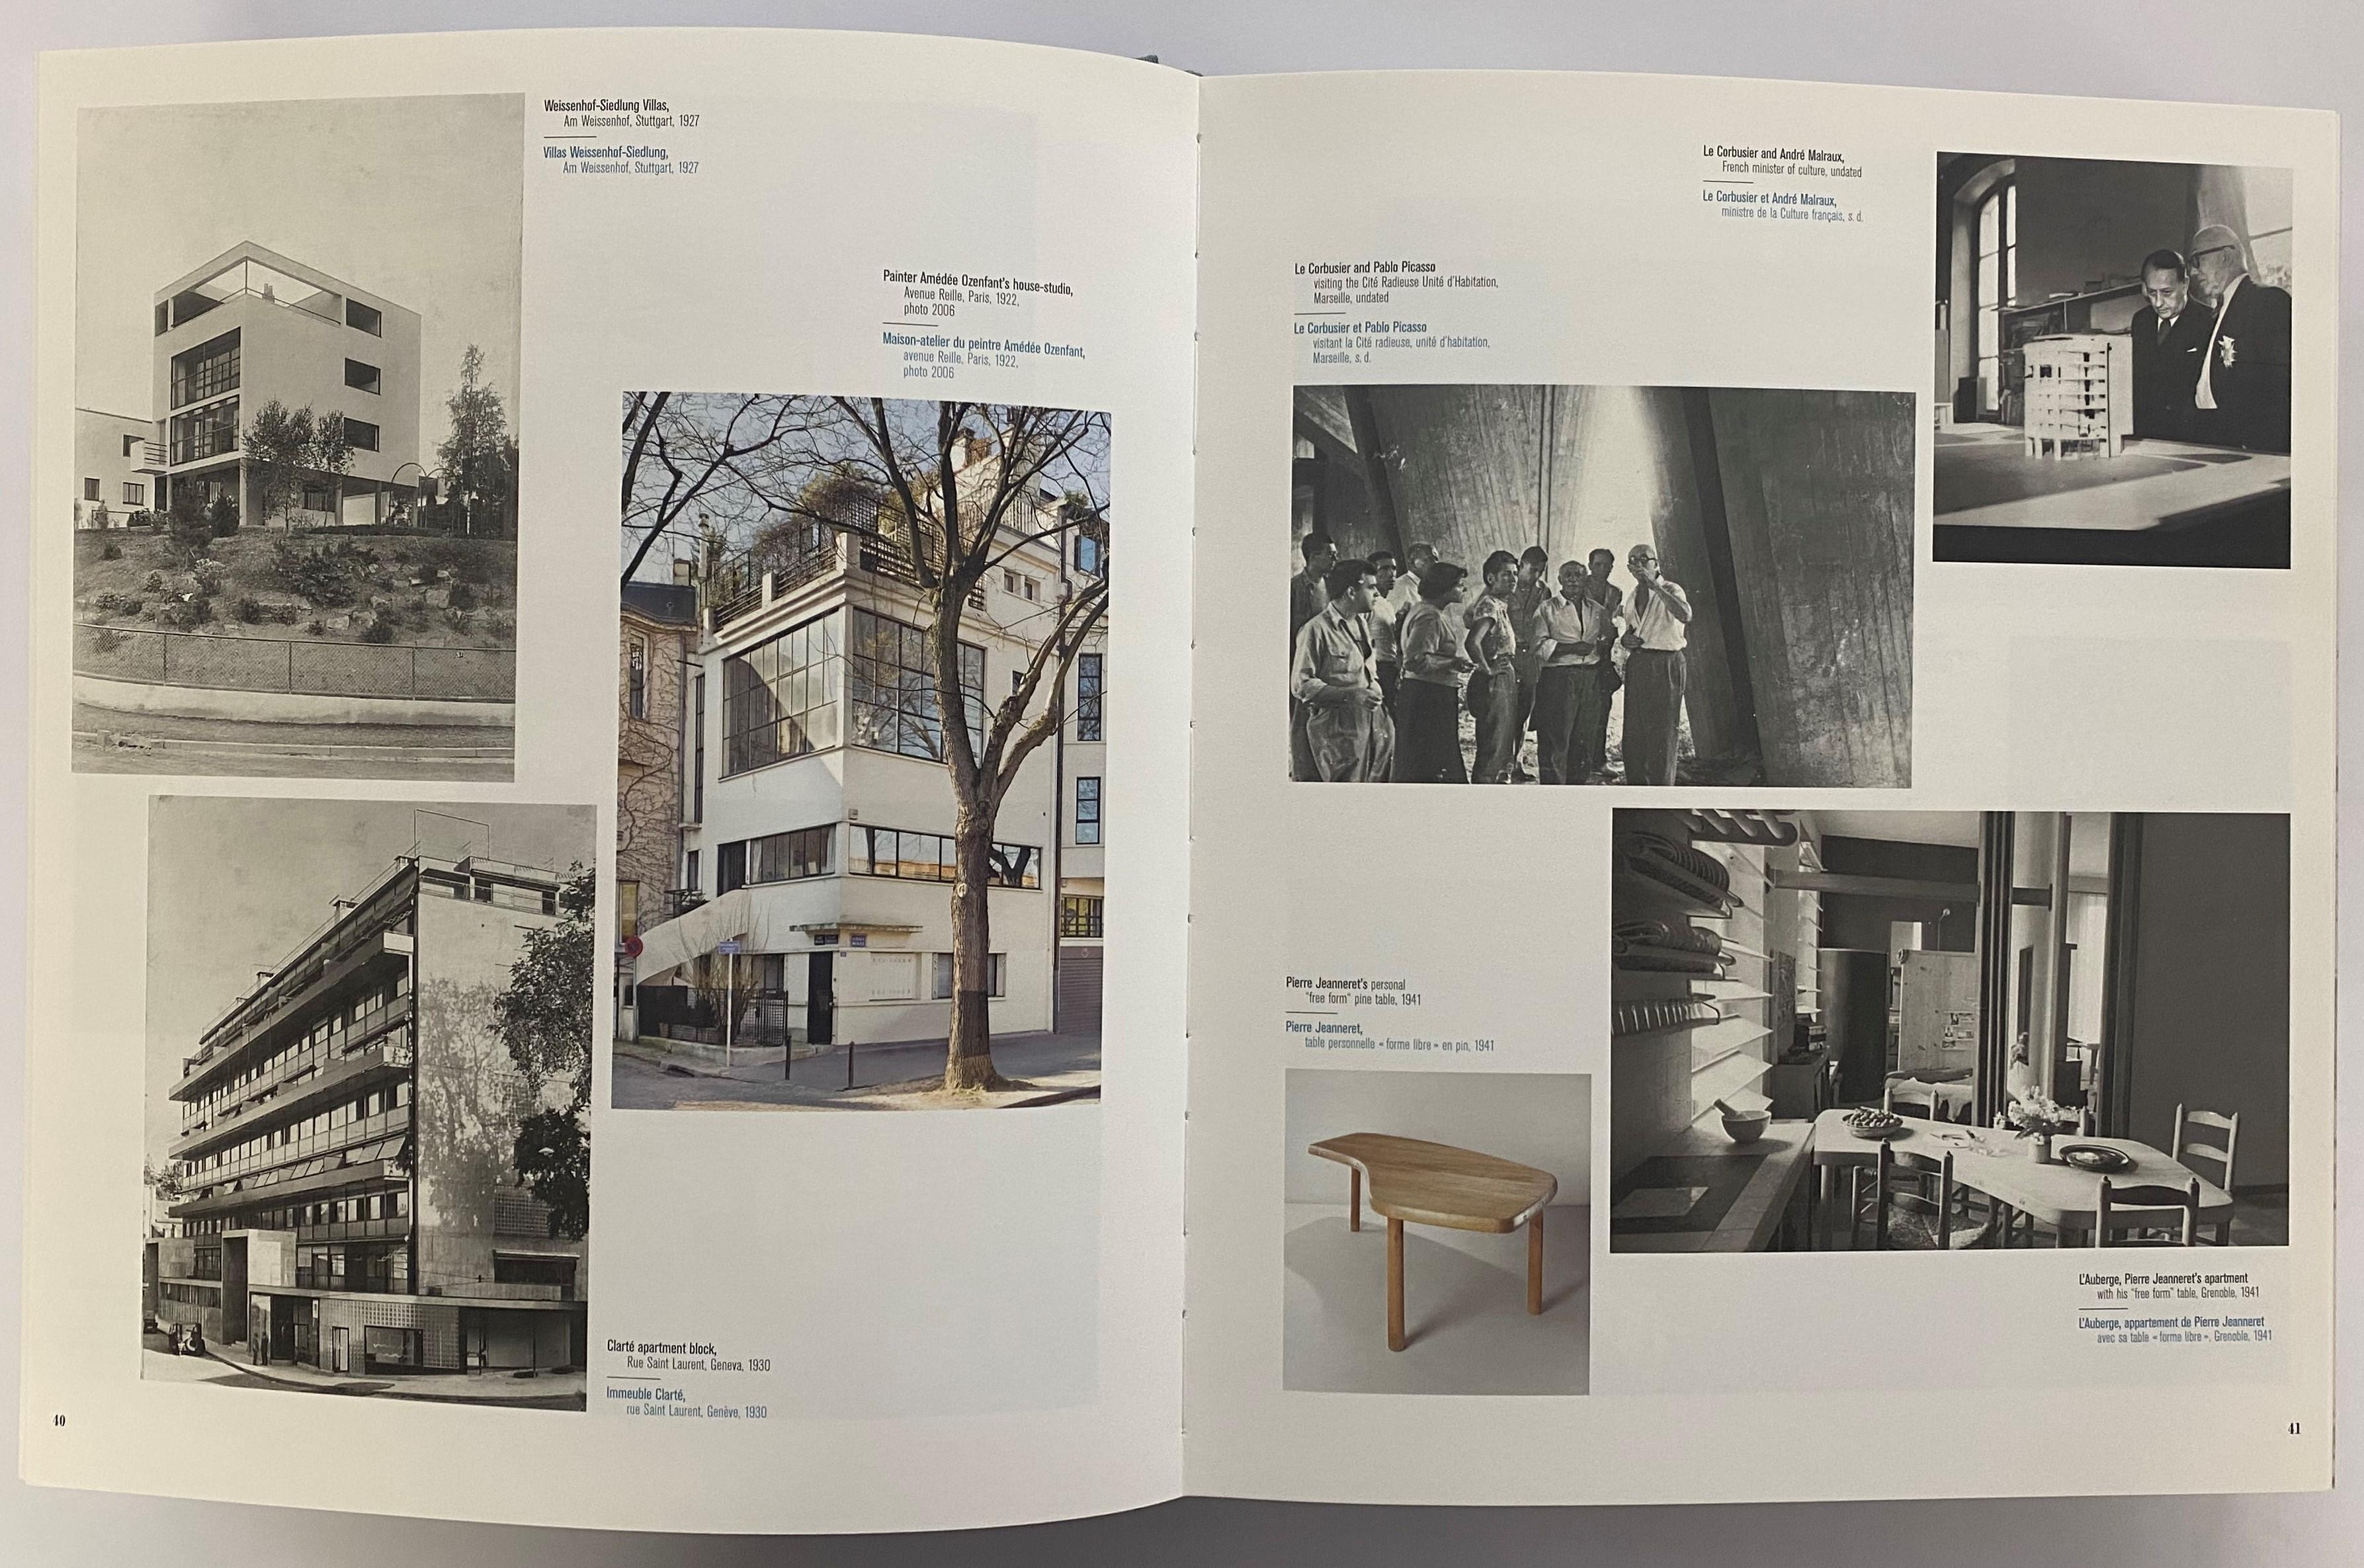 by Patrick Seguin
This beautiful, comprehensive volume documents Le Corbusier and Pierre Jeanneret's massive Chandigarh project--the buildings and the furniture (today considered masterpieces of twentieth-century architecture and design), the plans,